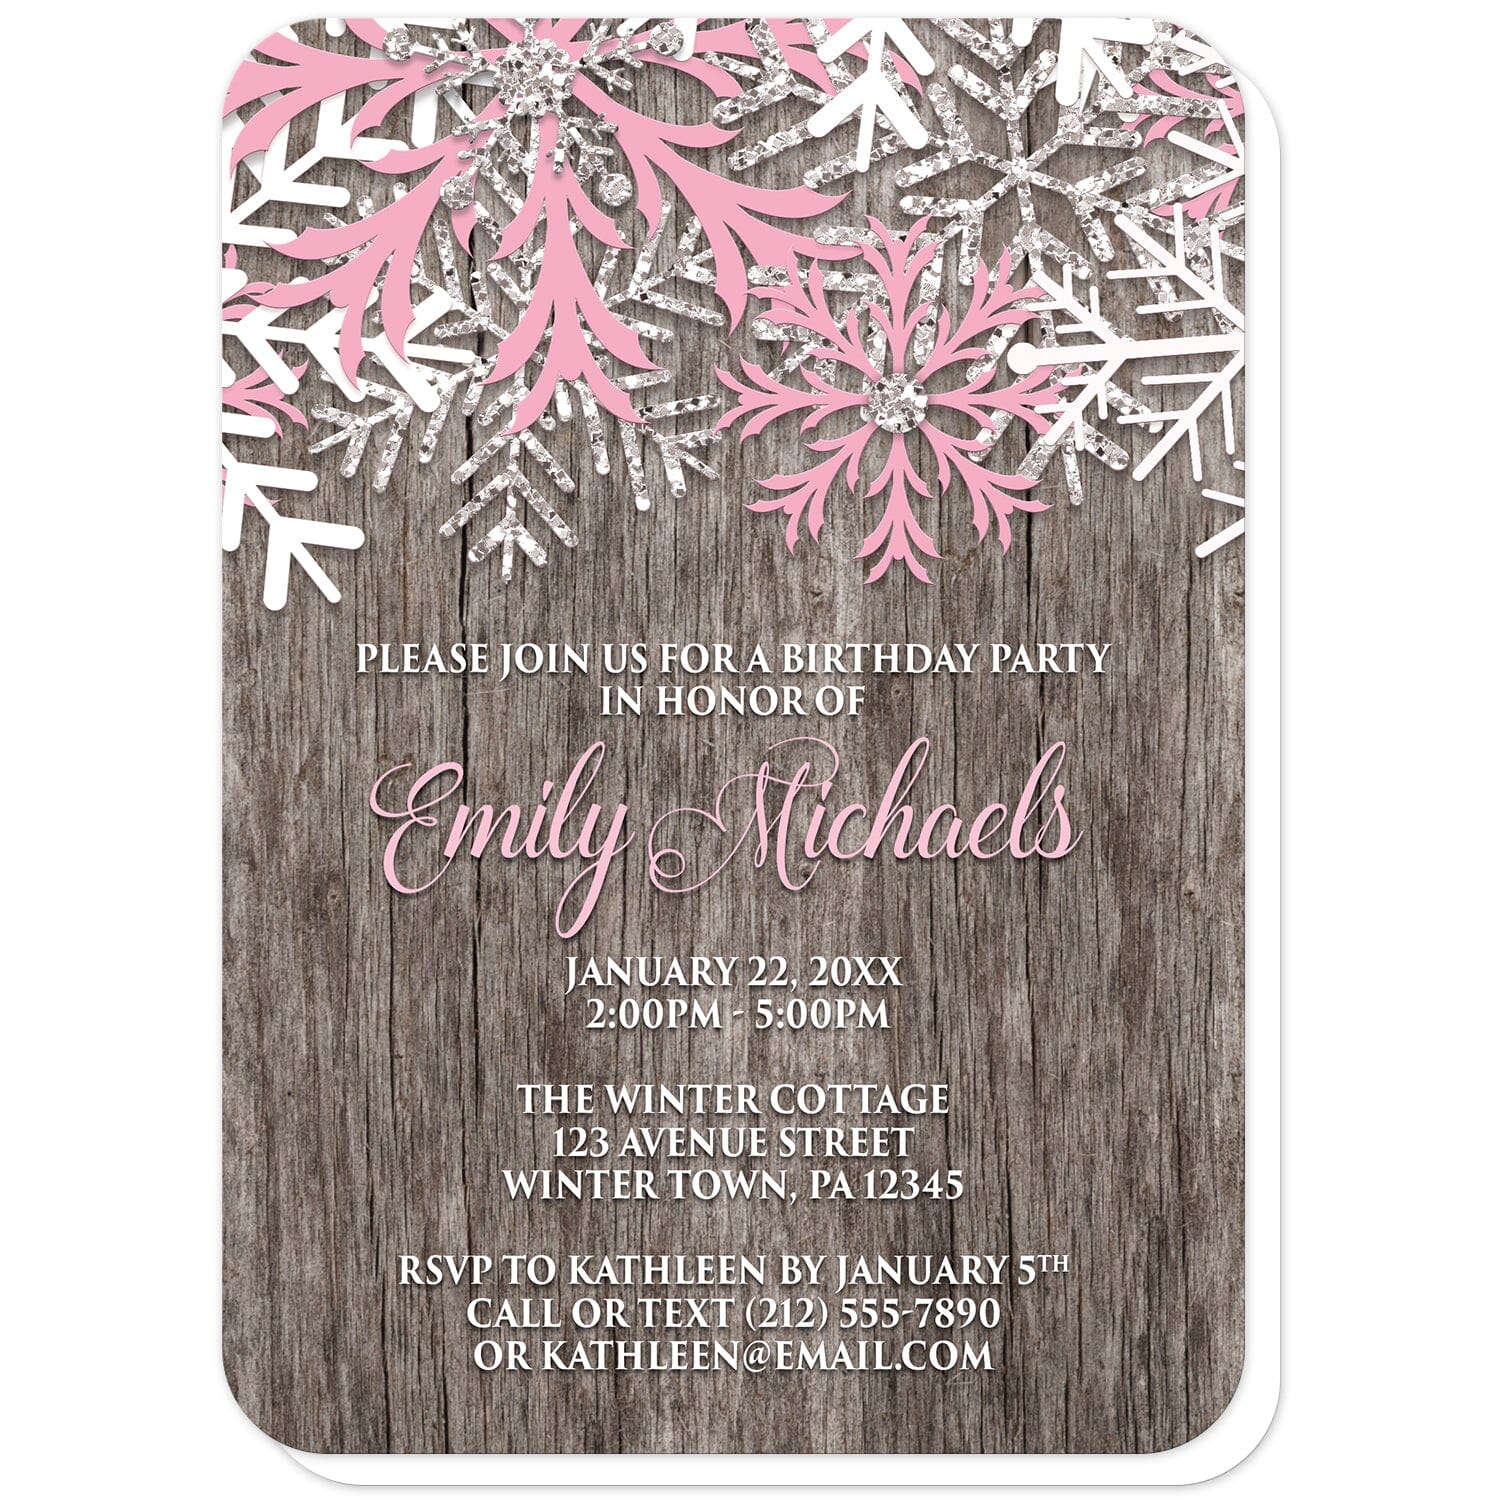 Rustic Winter Wood Pink Snowflake Birthday Invitations (with rounded corners) at Artistically Invited. Country-inspired rustic winter wood pink snowflake birthday invitations designed with pink, white, and silver-colored glitter-illustrated snowflakes along the top over a rustic wood pattern illustration. Your personalized birthday party details are custom printed in pink and white over the wood background below the snowflakes.